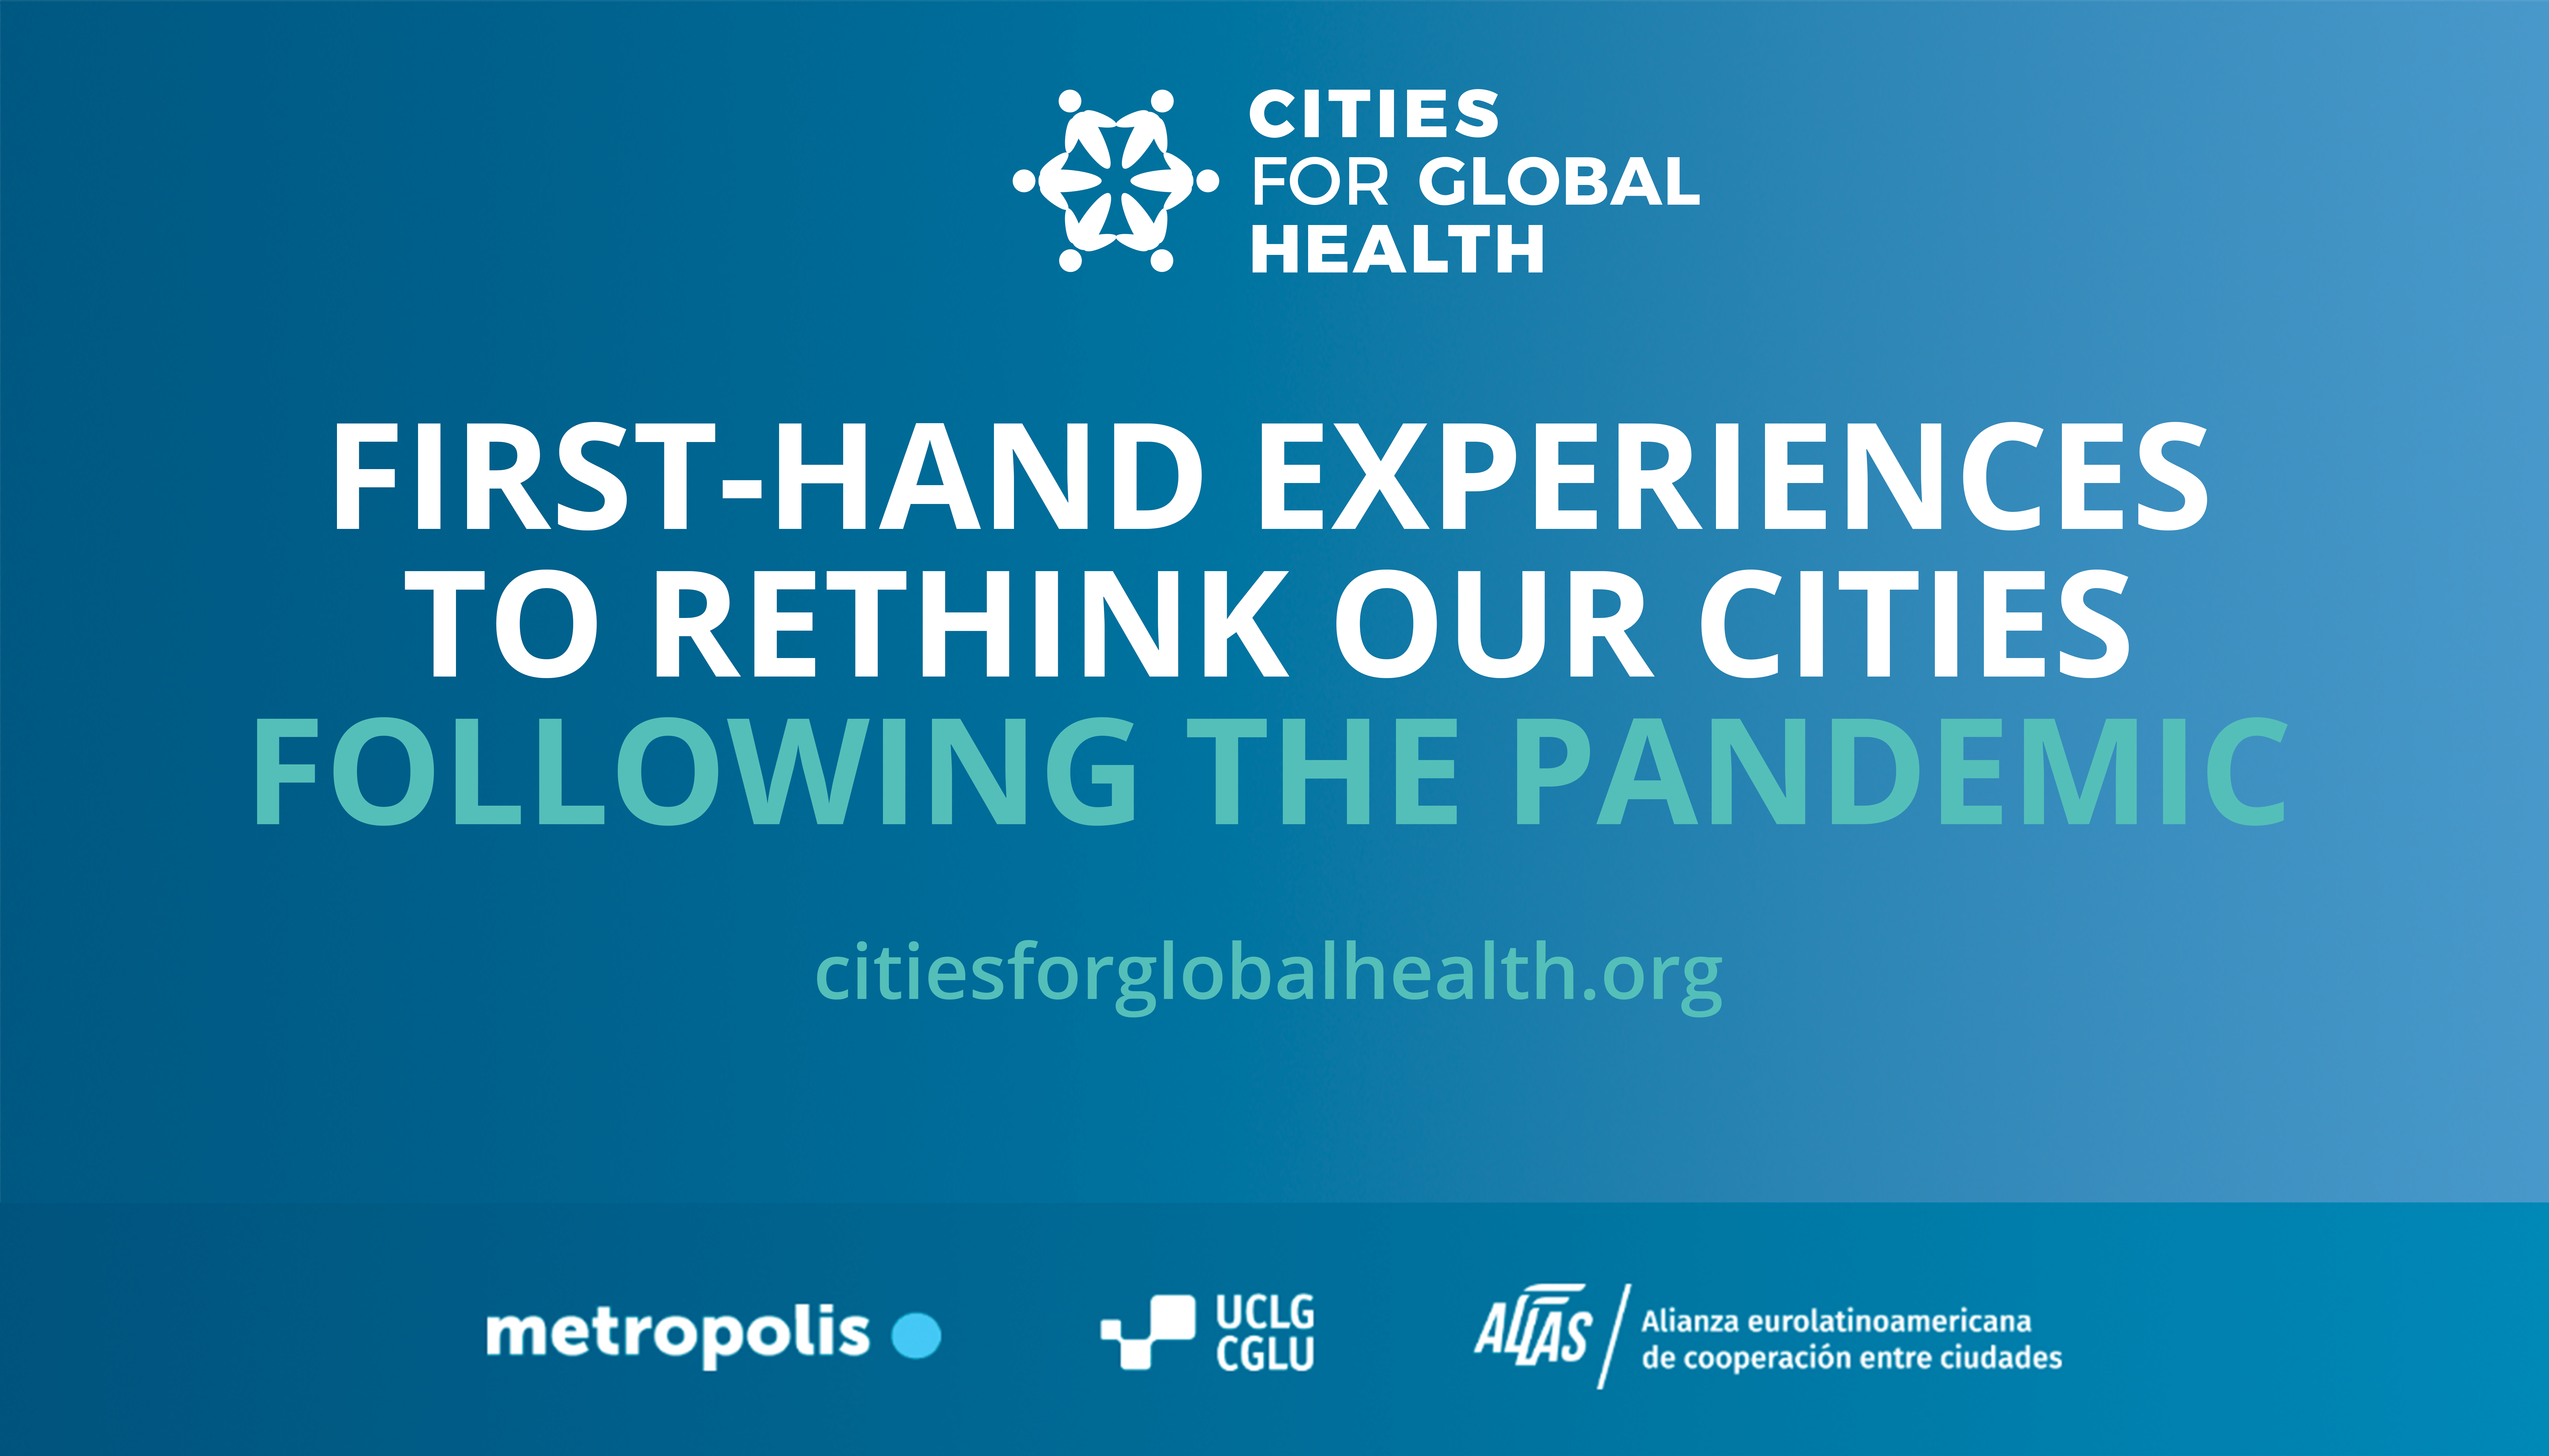 Cities for Global Health